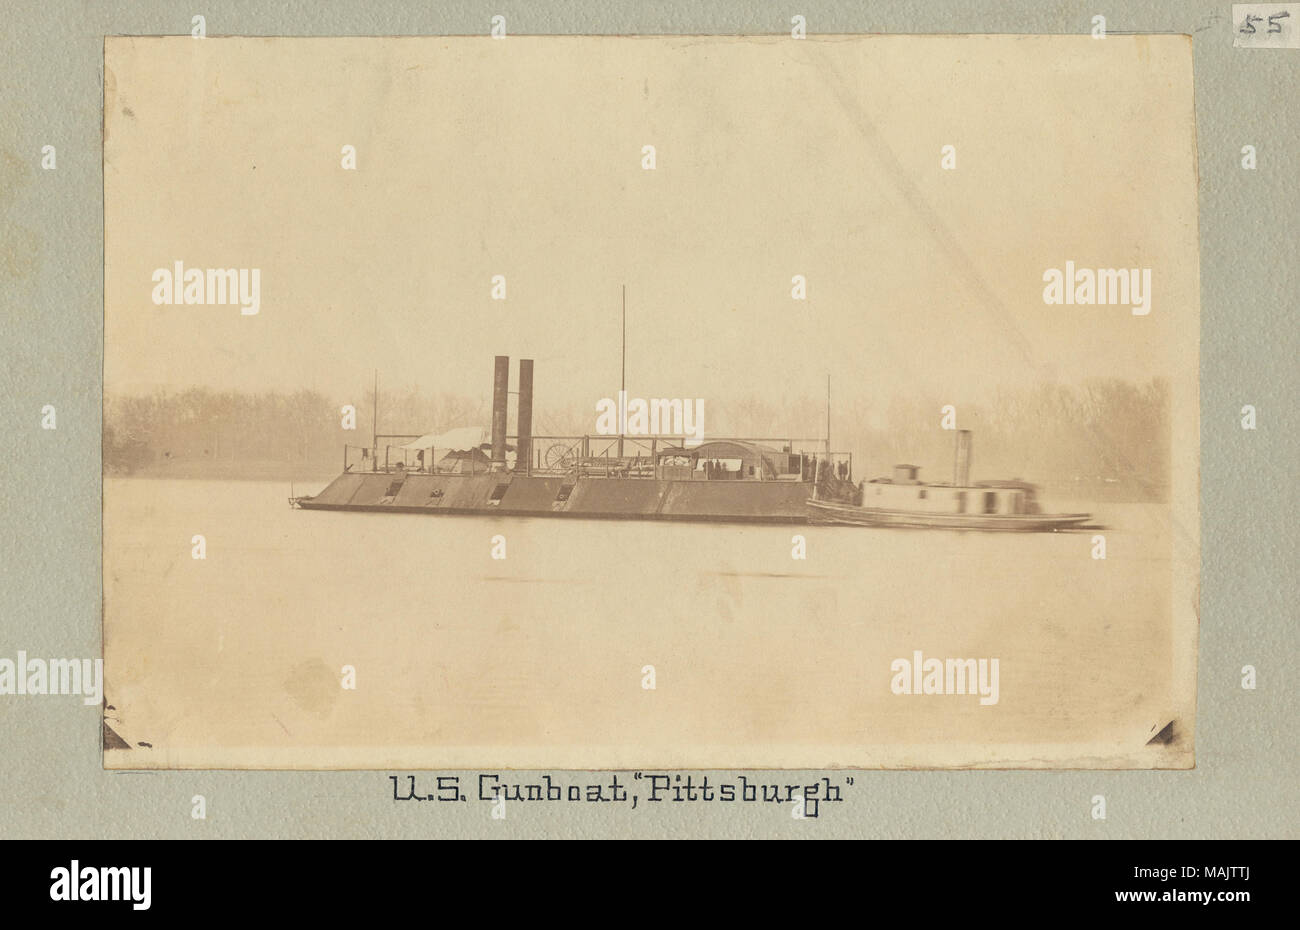 Photograph of an ironclad gunboat with twin stacks and four gun ports visible on port side. There is a smaller vessel behind the Pittsburg. 'U. S. Gunboat, 'Pittsburg'' (written below image). 'Gunboats # 55 Pittsburg Gift of John and Lewis Eads How' (written on reverse side). Eads' gunboat built in Carondelet, Missouri. Sister boat of the St. Louis, Louisville, and Carondelet. Title: U.S.S. Pittsburg.  . between 1861 and 1865. Stock Photo